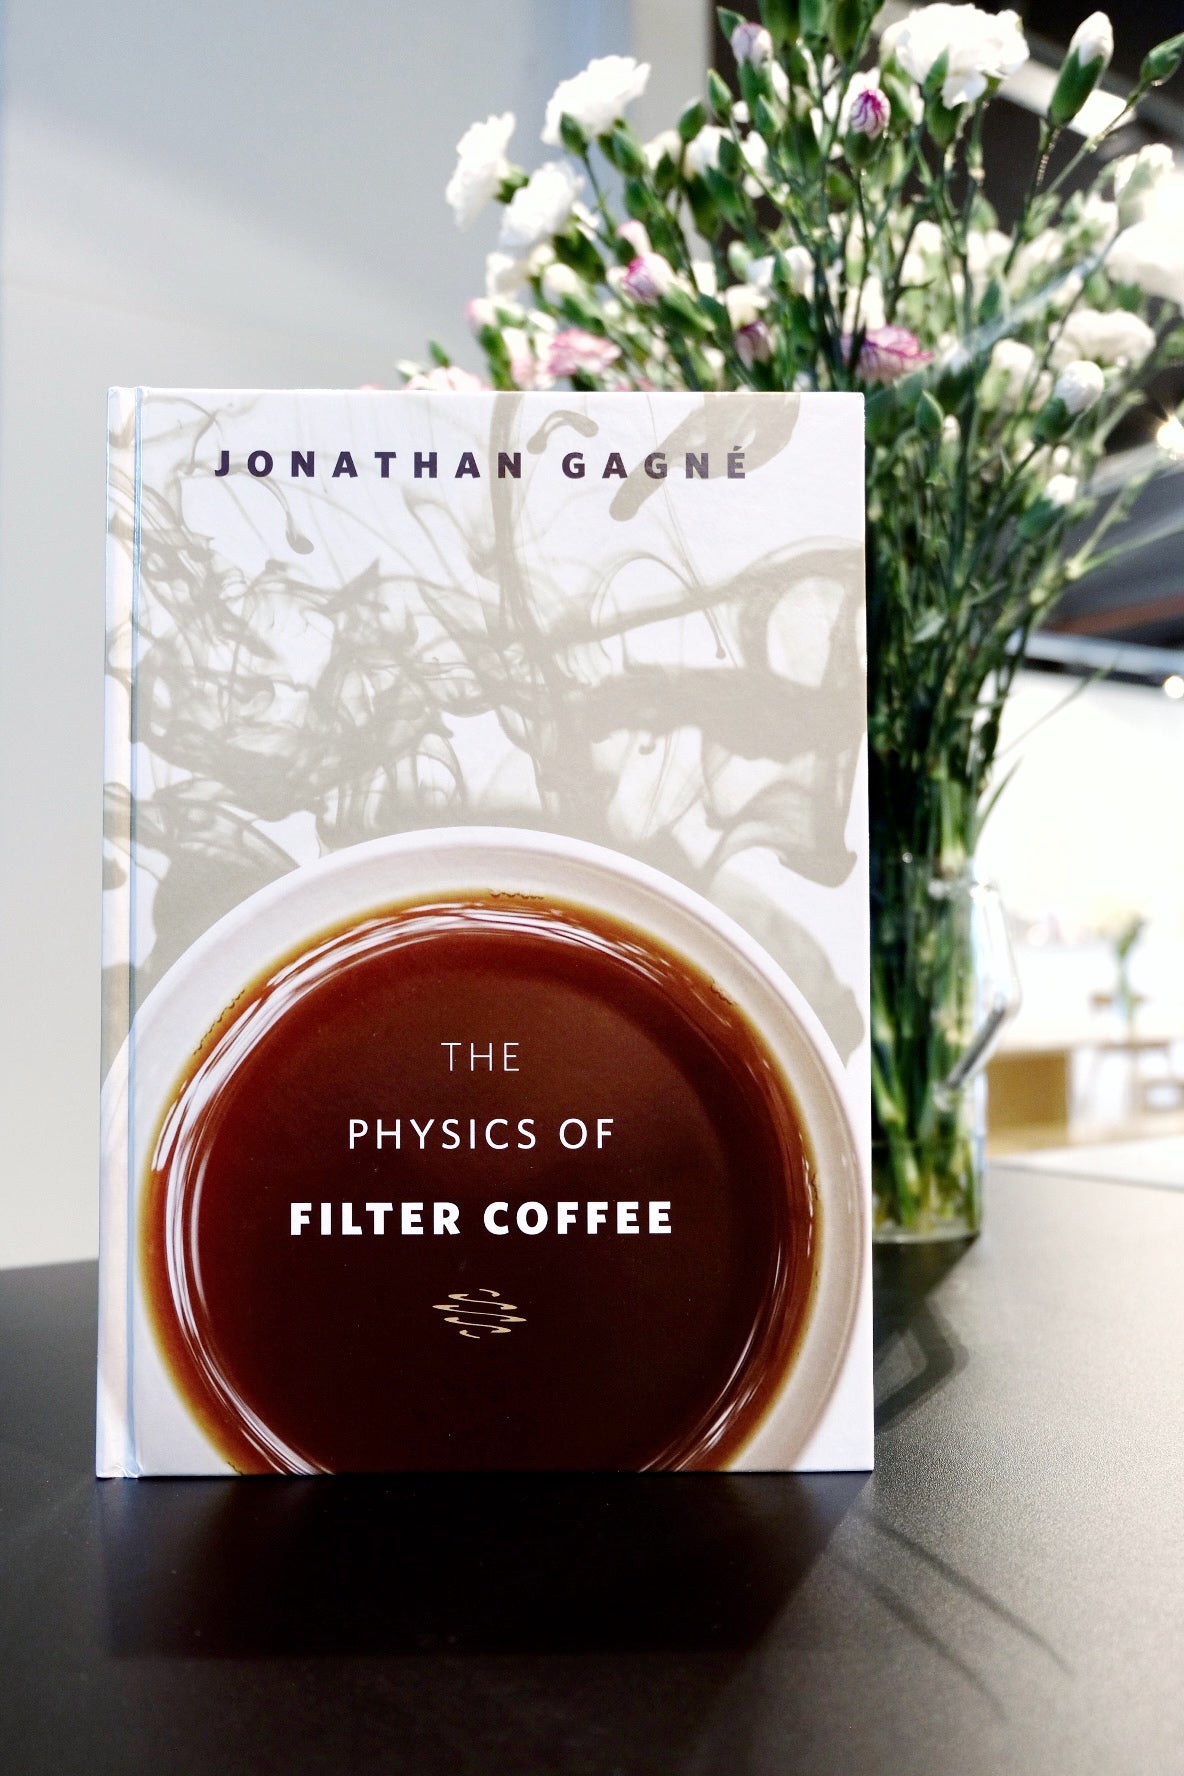 The physics of filter coffee